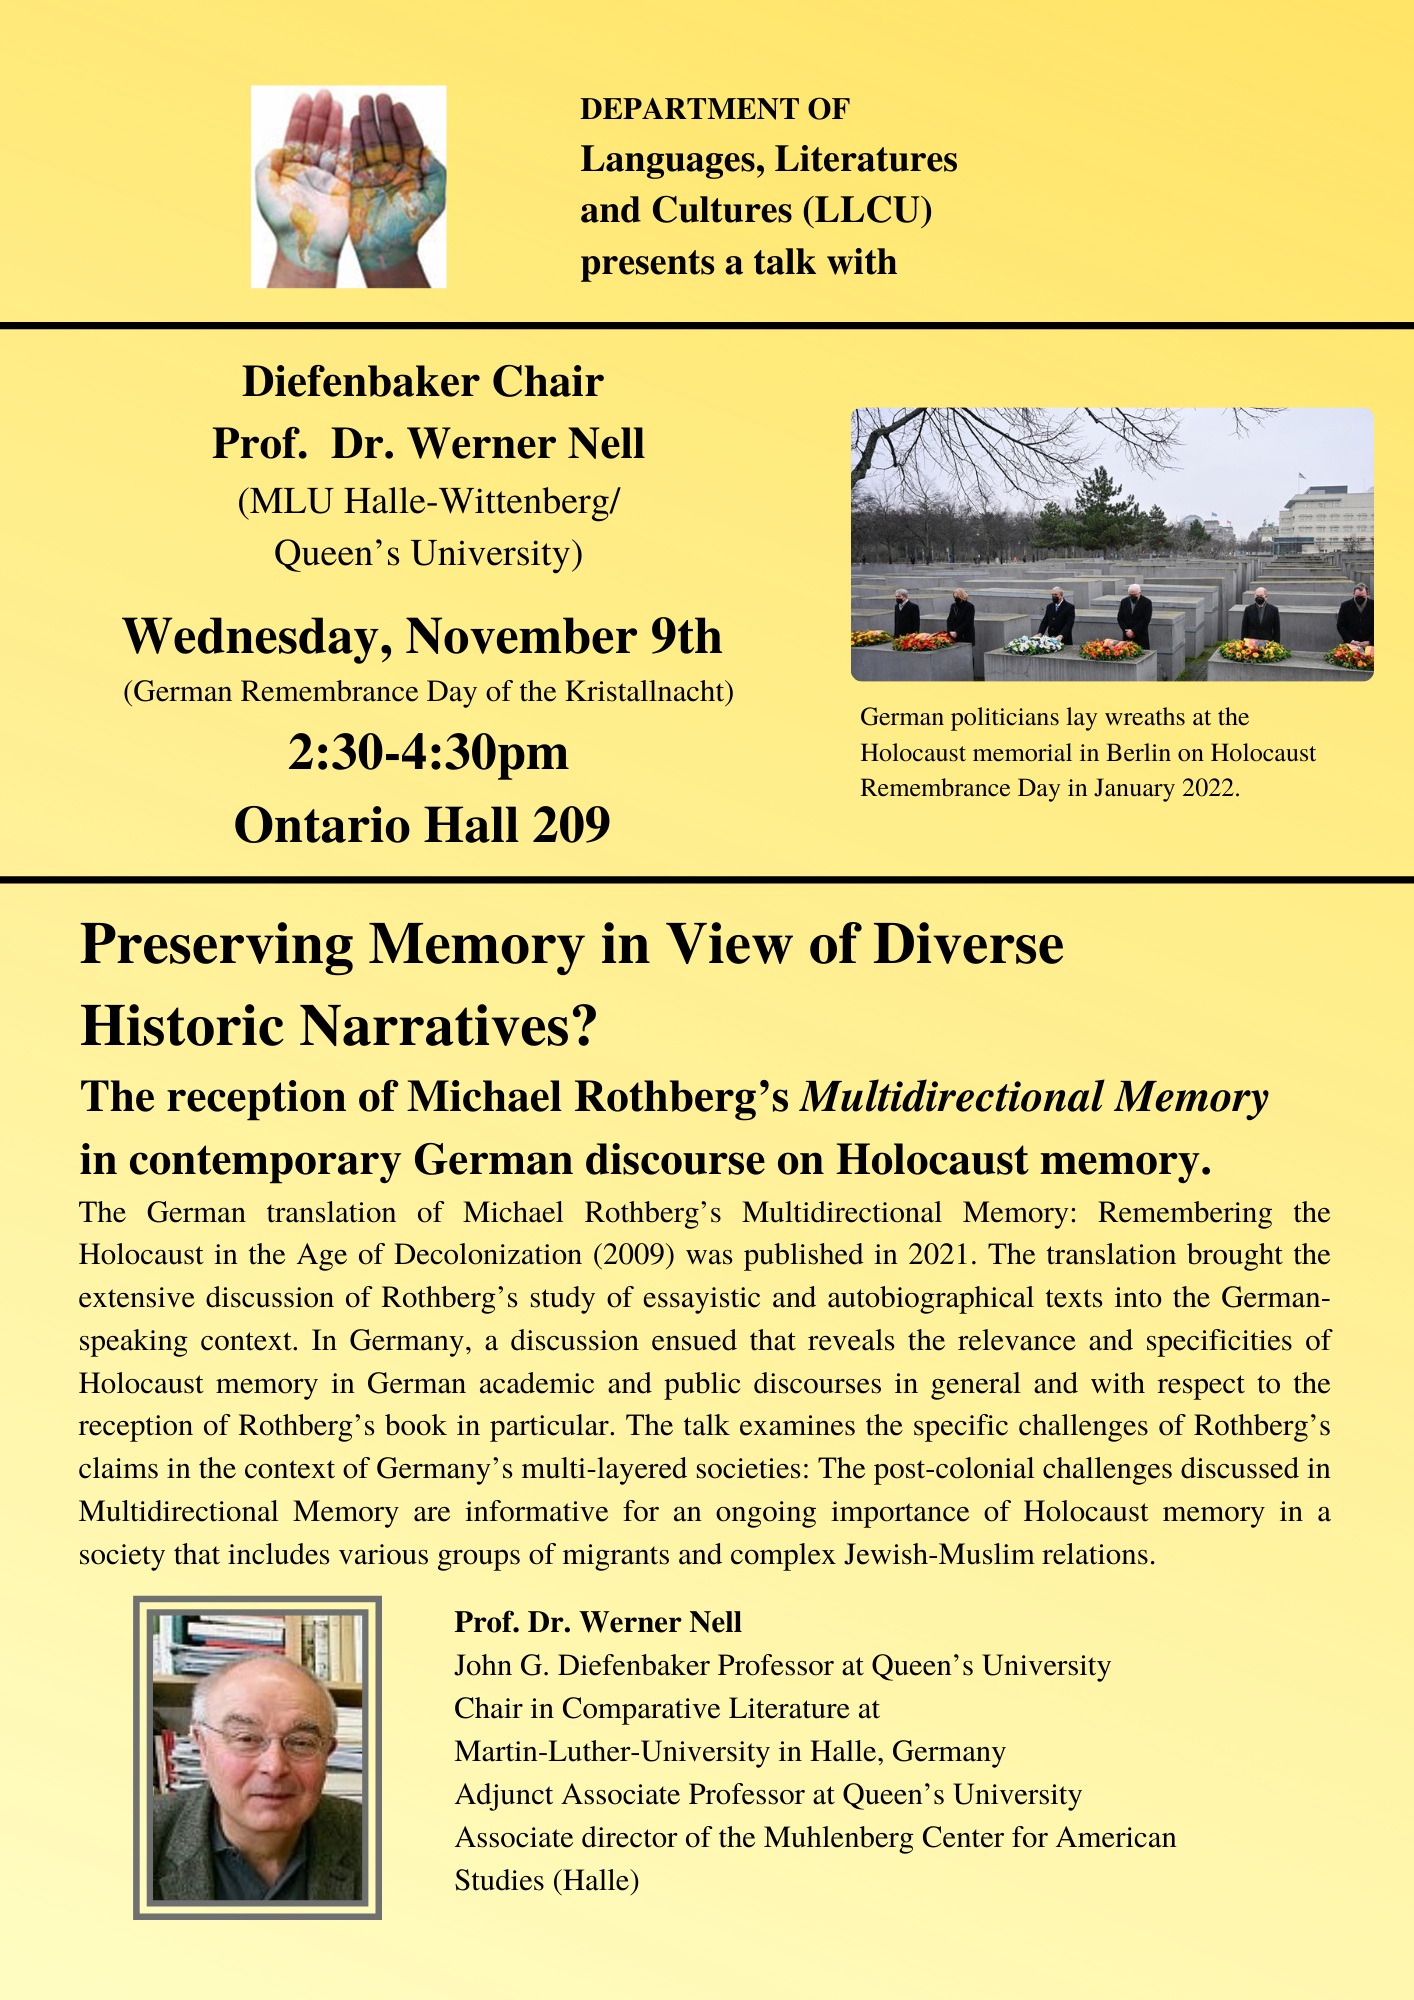 poster for Nov 9/22 talk by Diefenbaker Chair Prof. Werner Nell